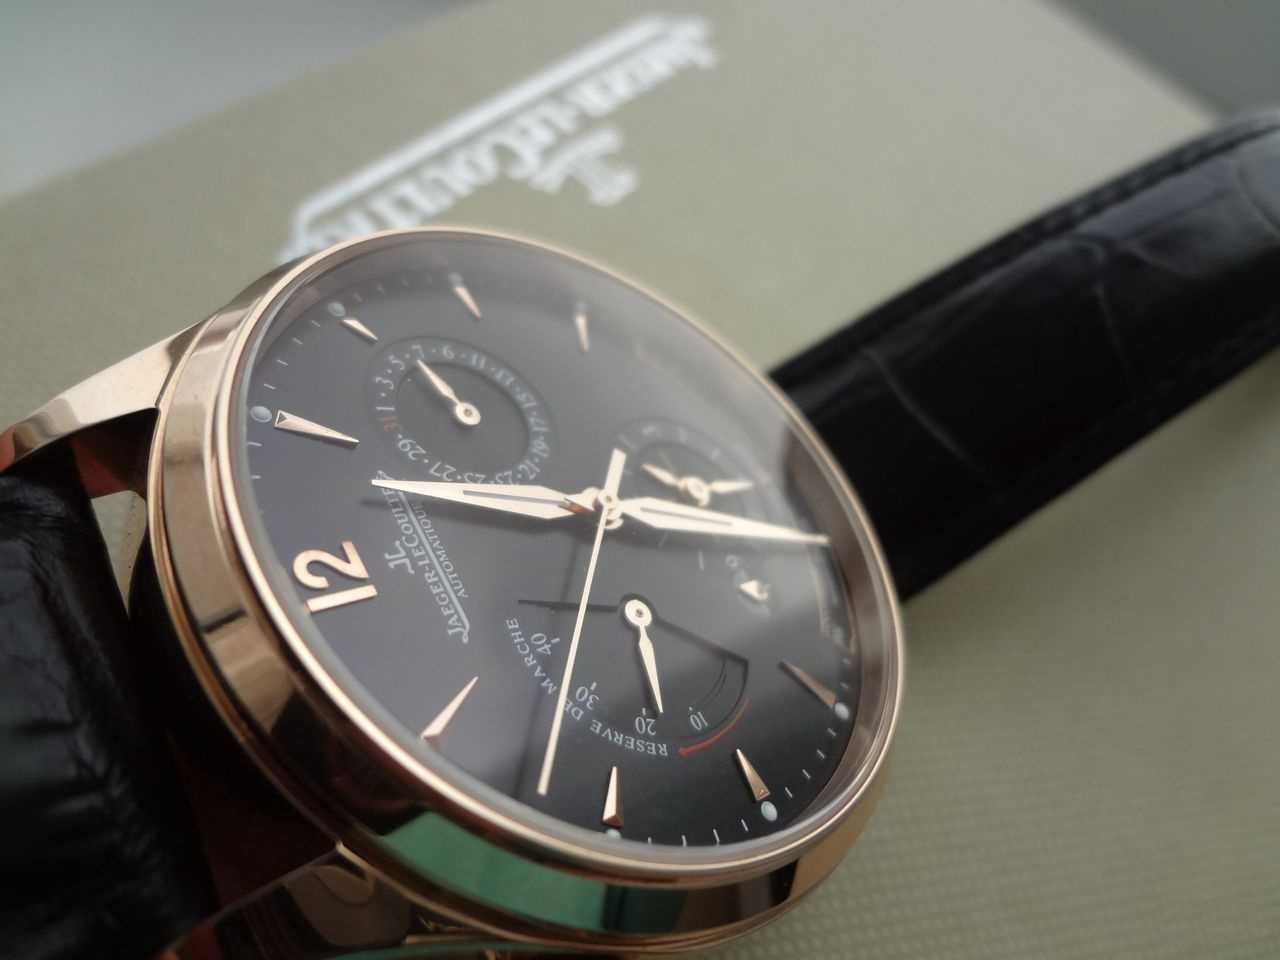 Jaeger Lecoultre Geographic Dual Time Zone